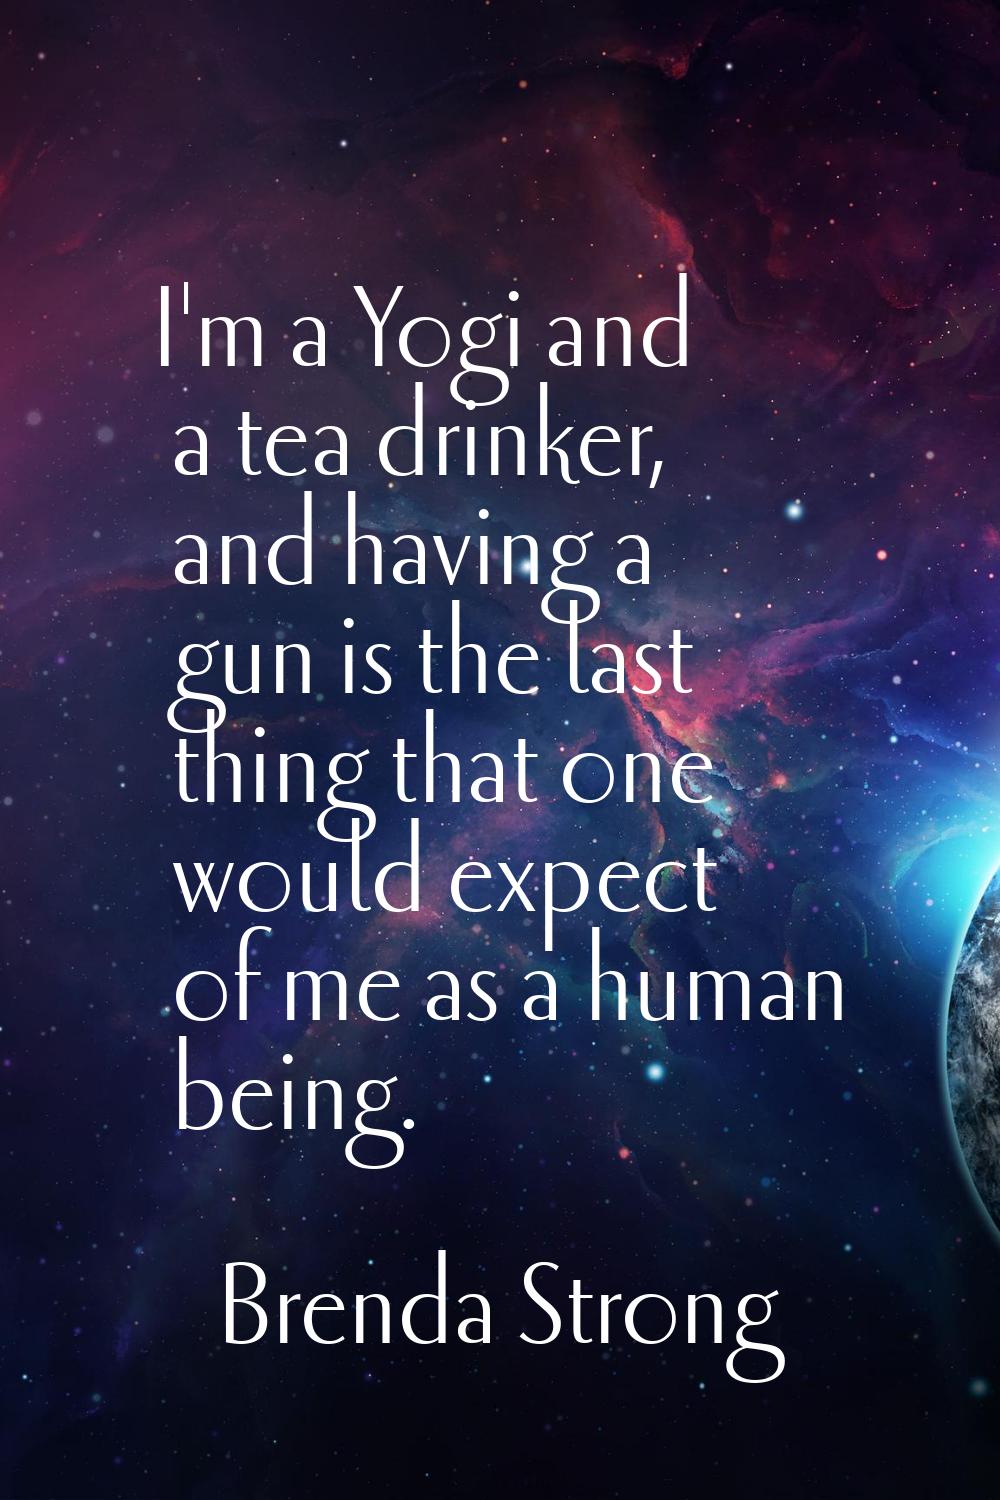 I'm a Yogi and a tea drinker, and having a gun is the last thing that one would expect of me as a h